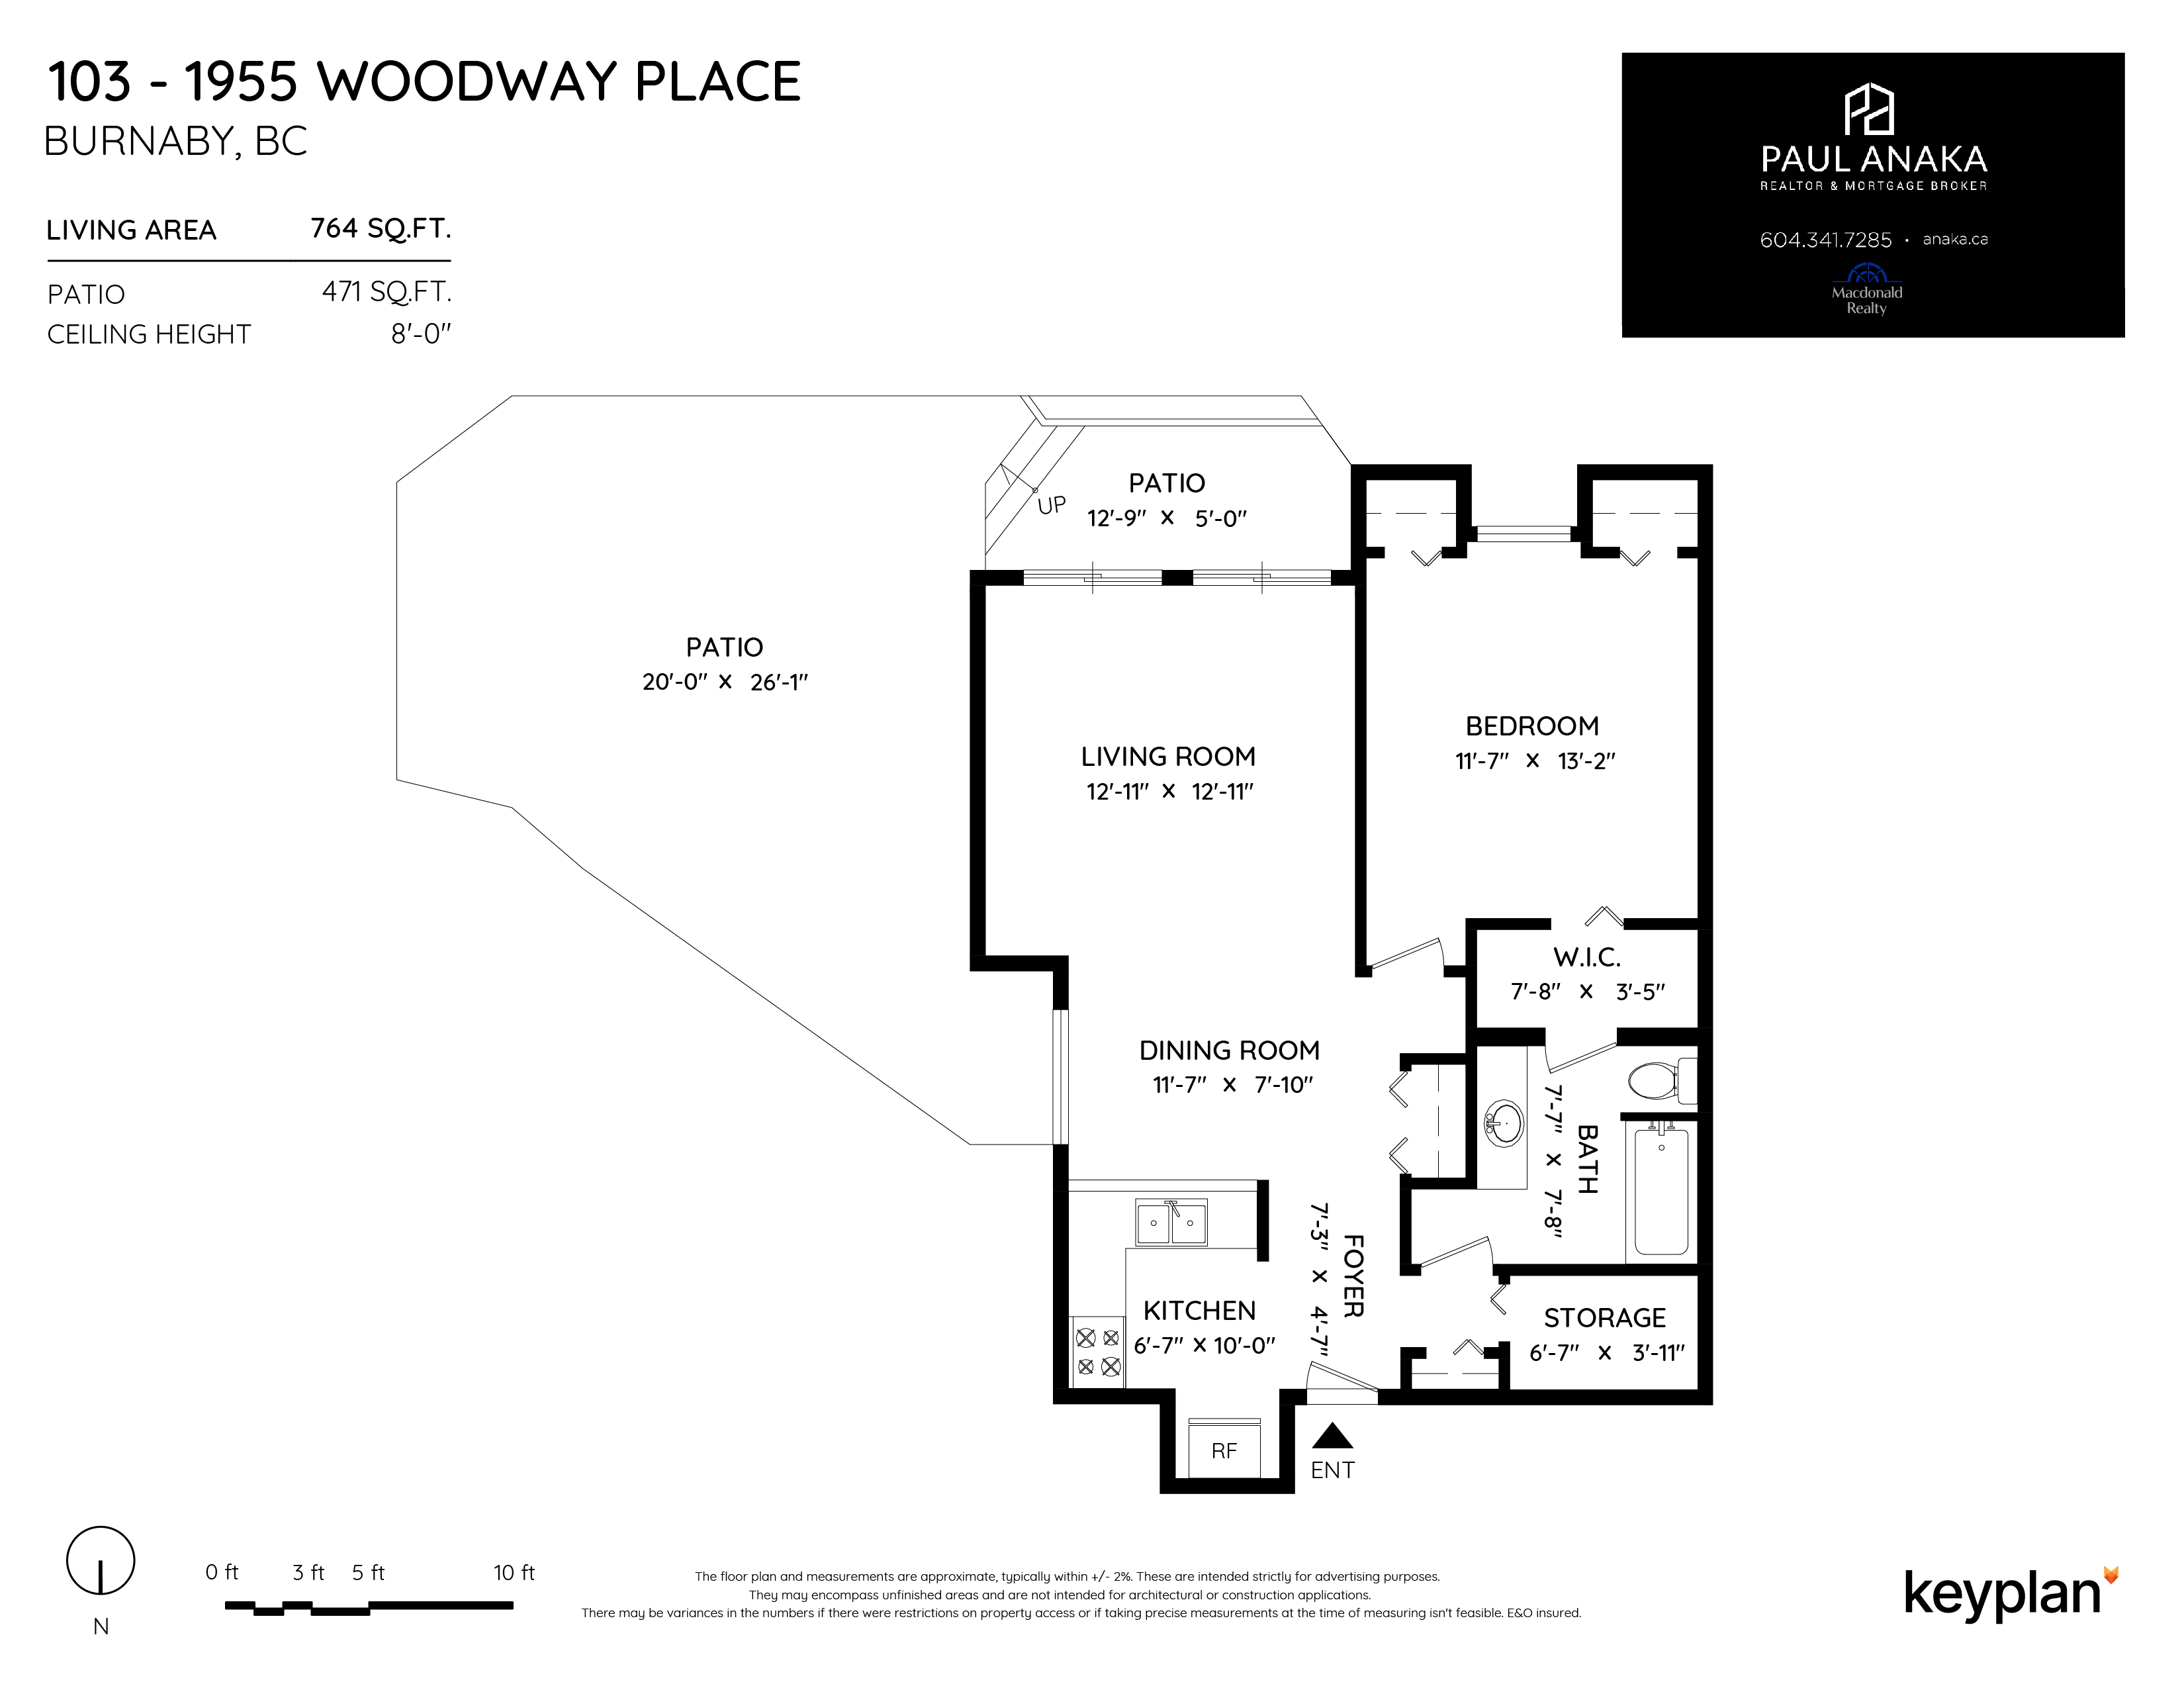 Paul Anaka - Unit 103 - 1955 Woodway Place, Burnaby, BC, Canada | Floor Plan 1